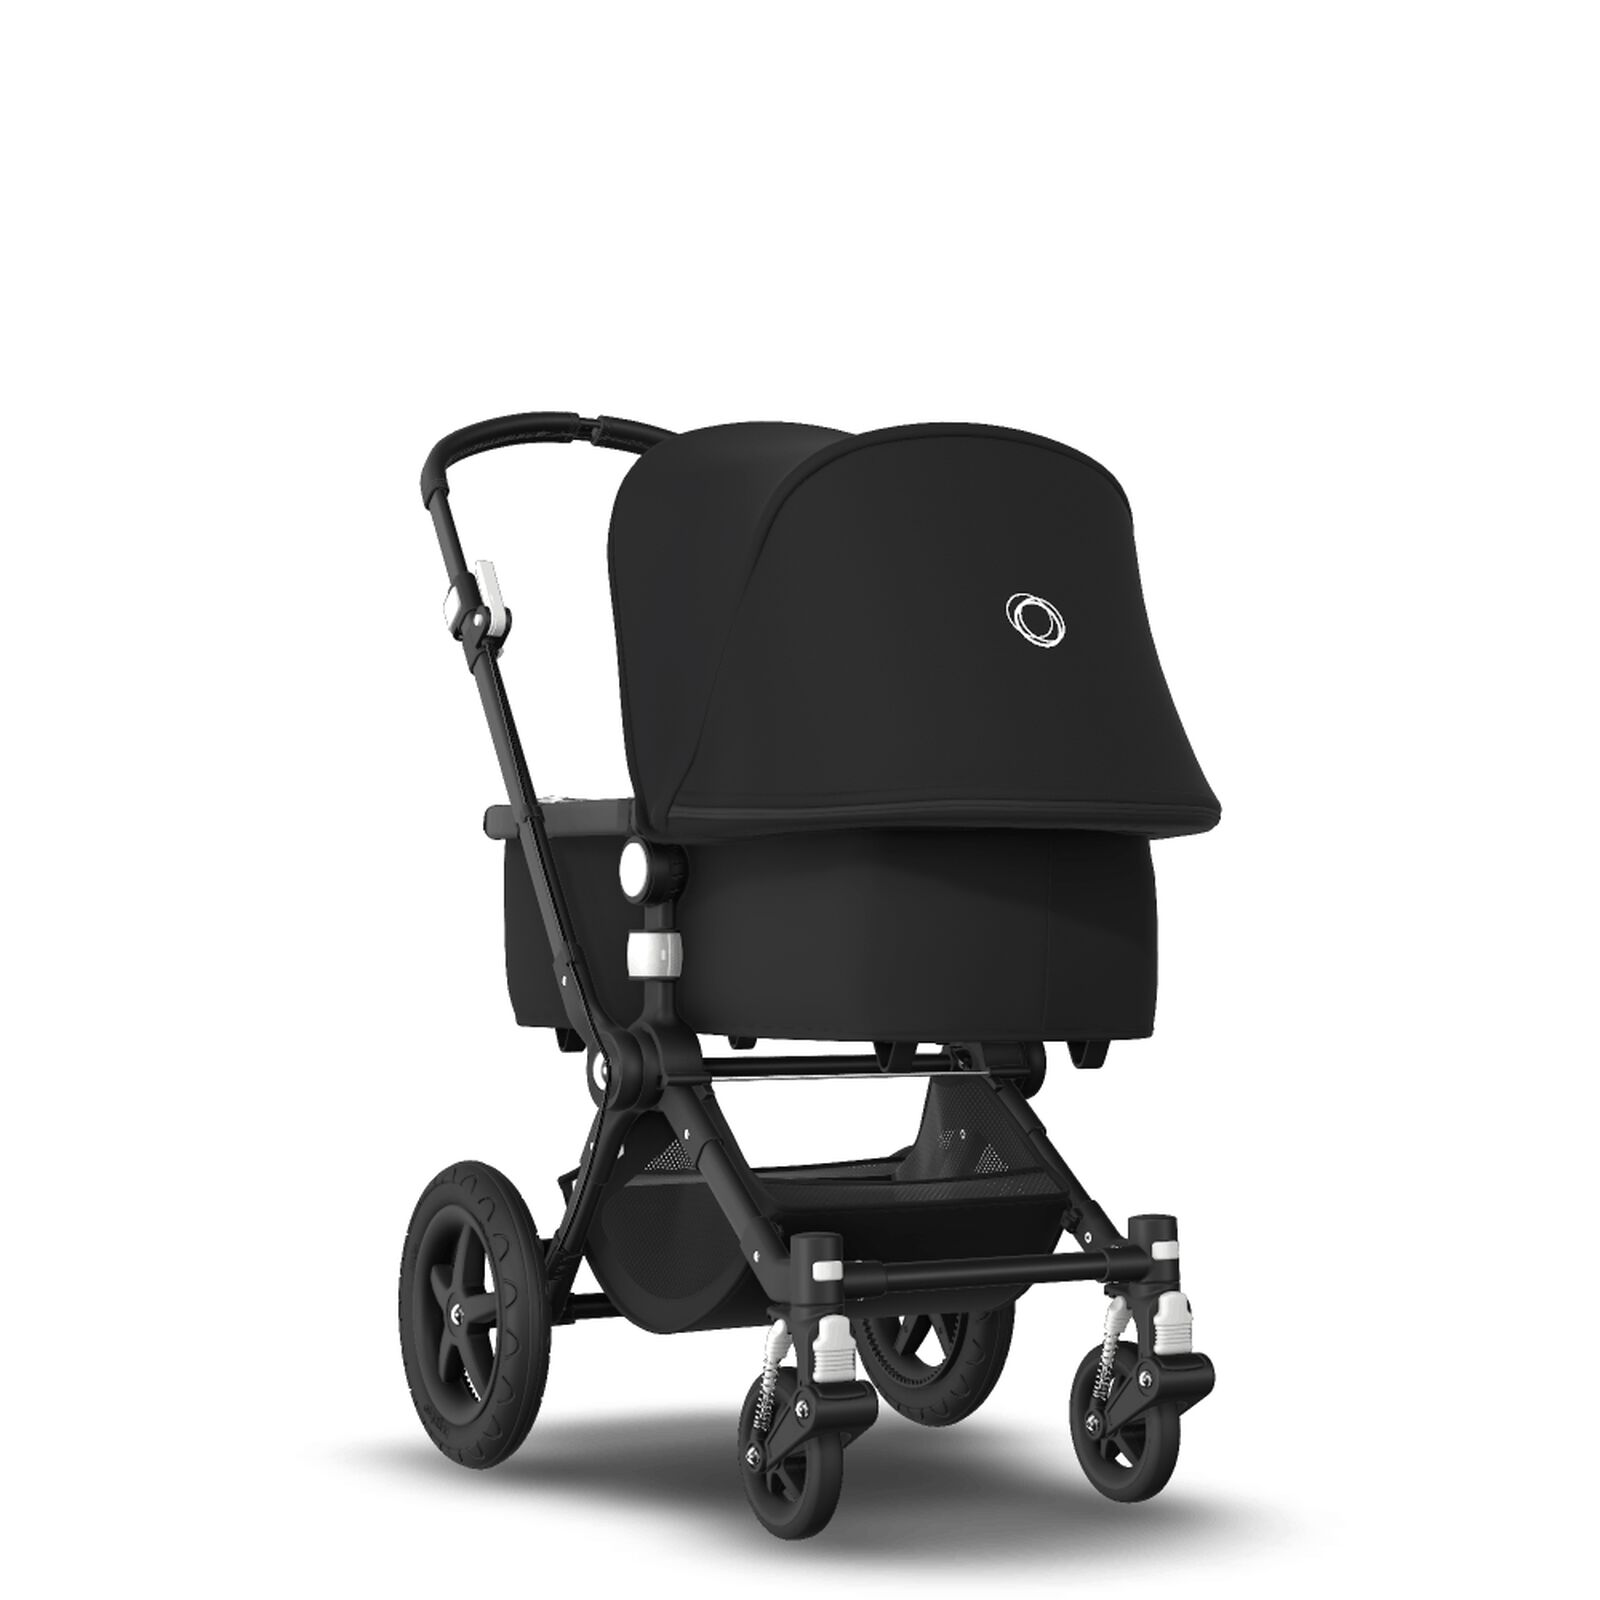 Pack Bugaboo Cameleon 3 Plus - View 1